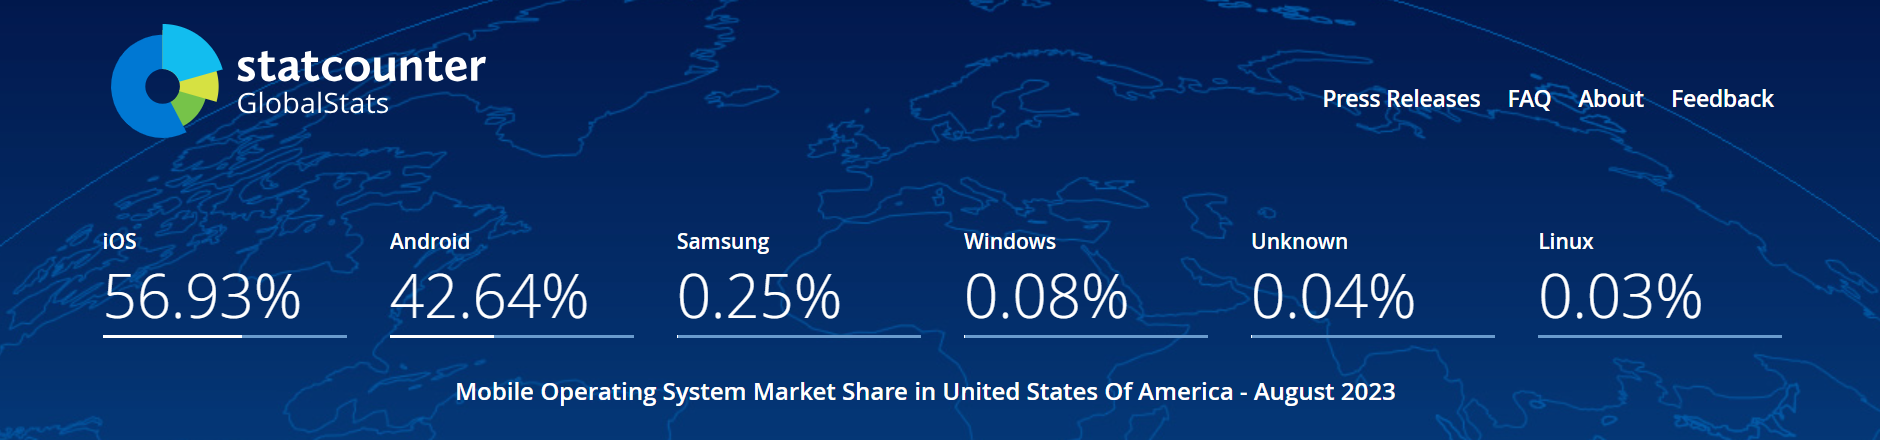 Mobile OS market share in the USA